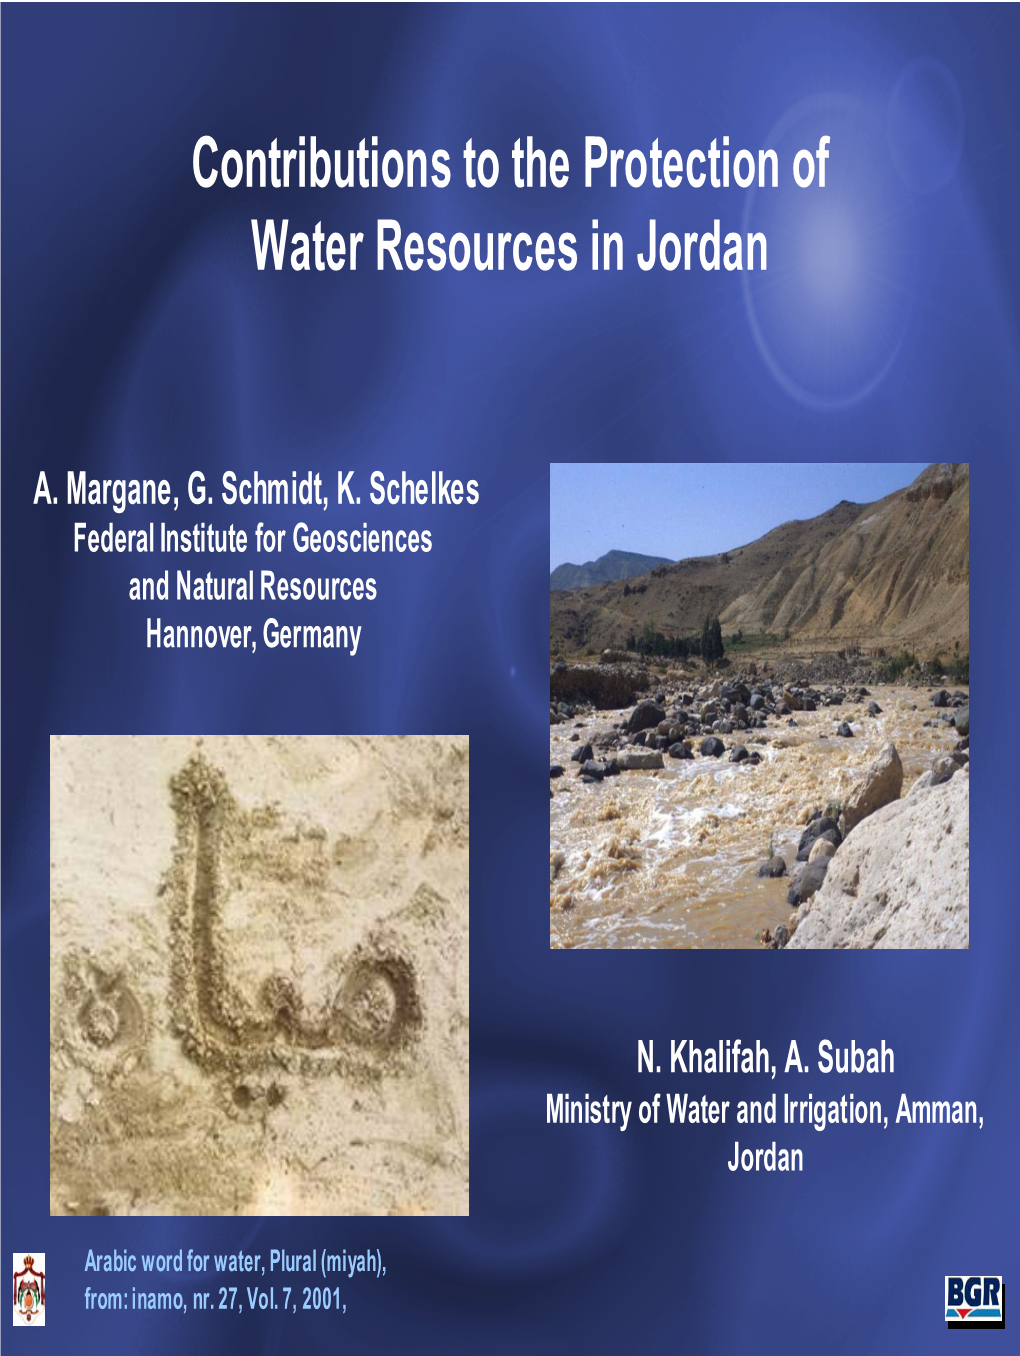 Contributions to the Protection of Water Resources in Jordan (PDF, 6